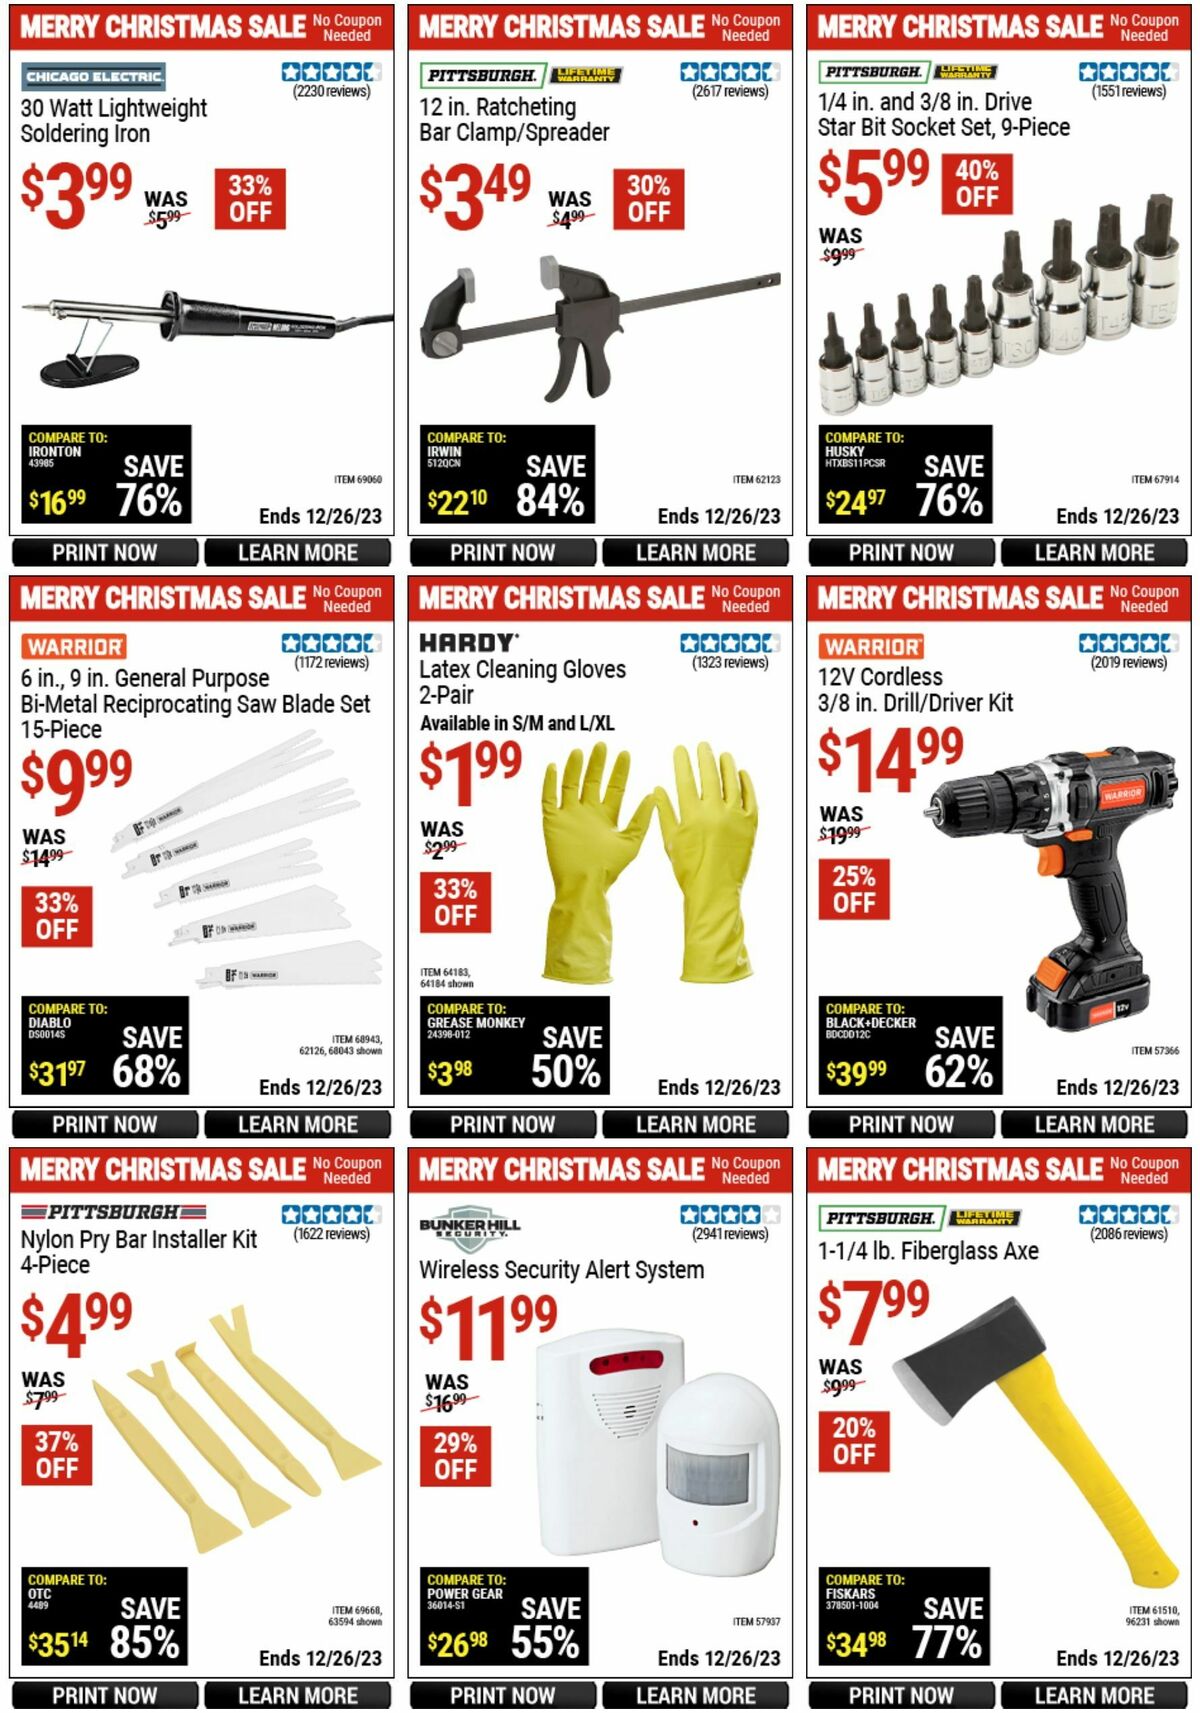 Harbor Freight Tools Weekly Ad from December 10